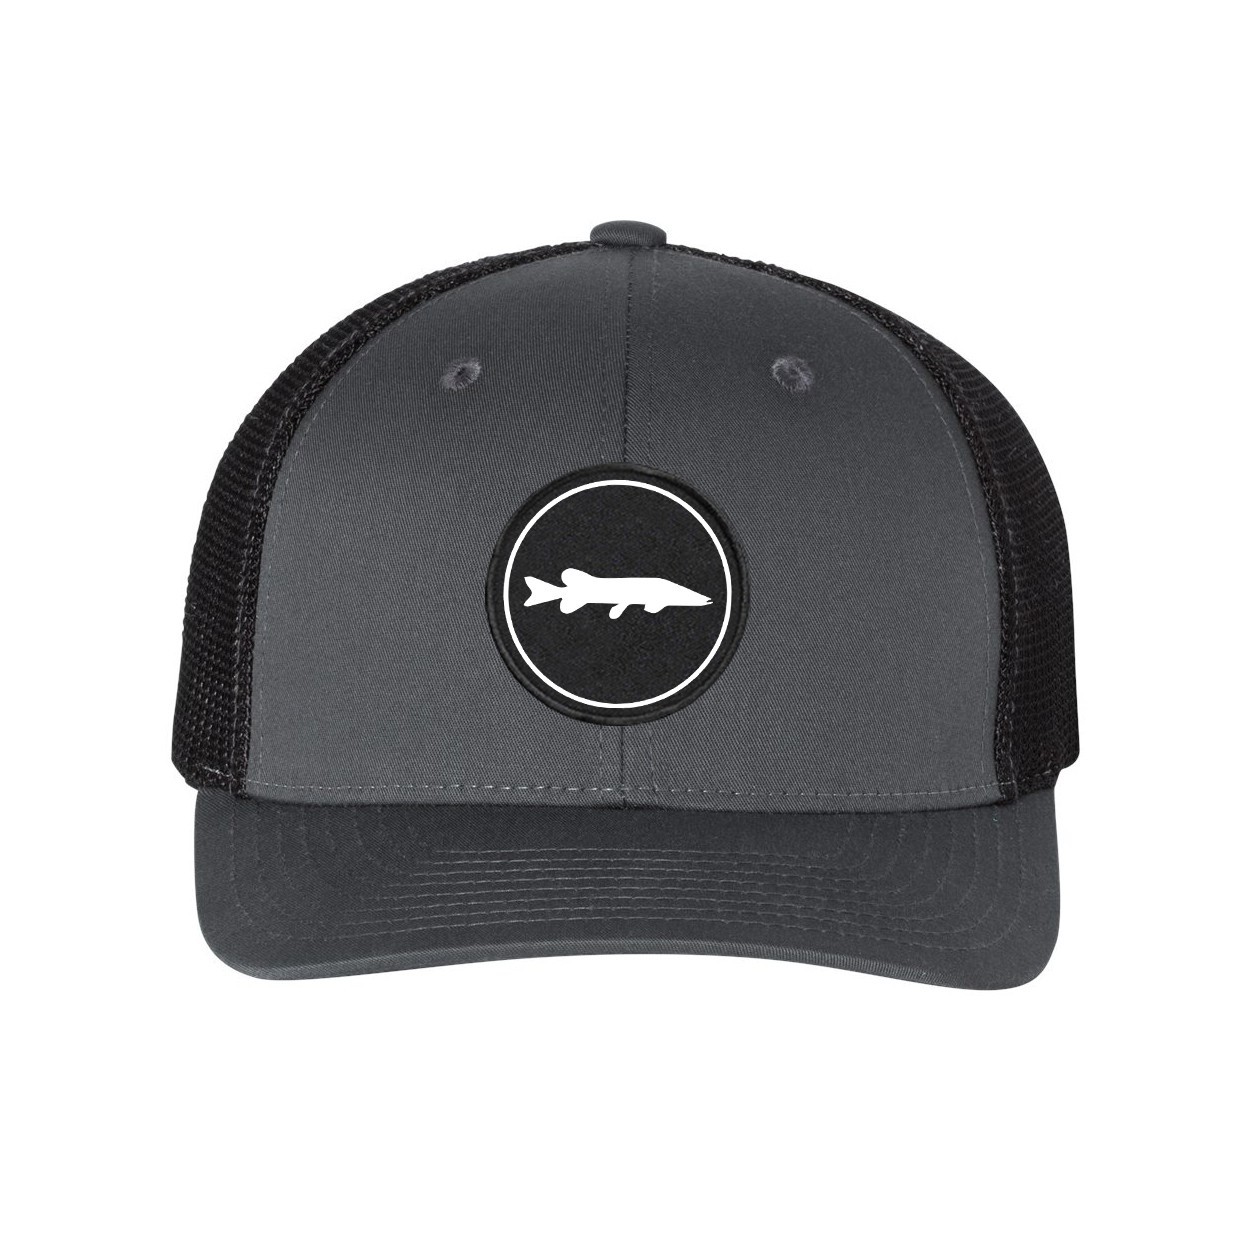 Simms Bass Icon Trucker Hat, Snapback Cap with Fish